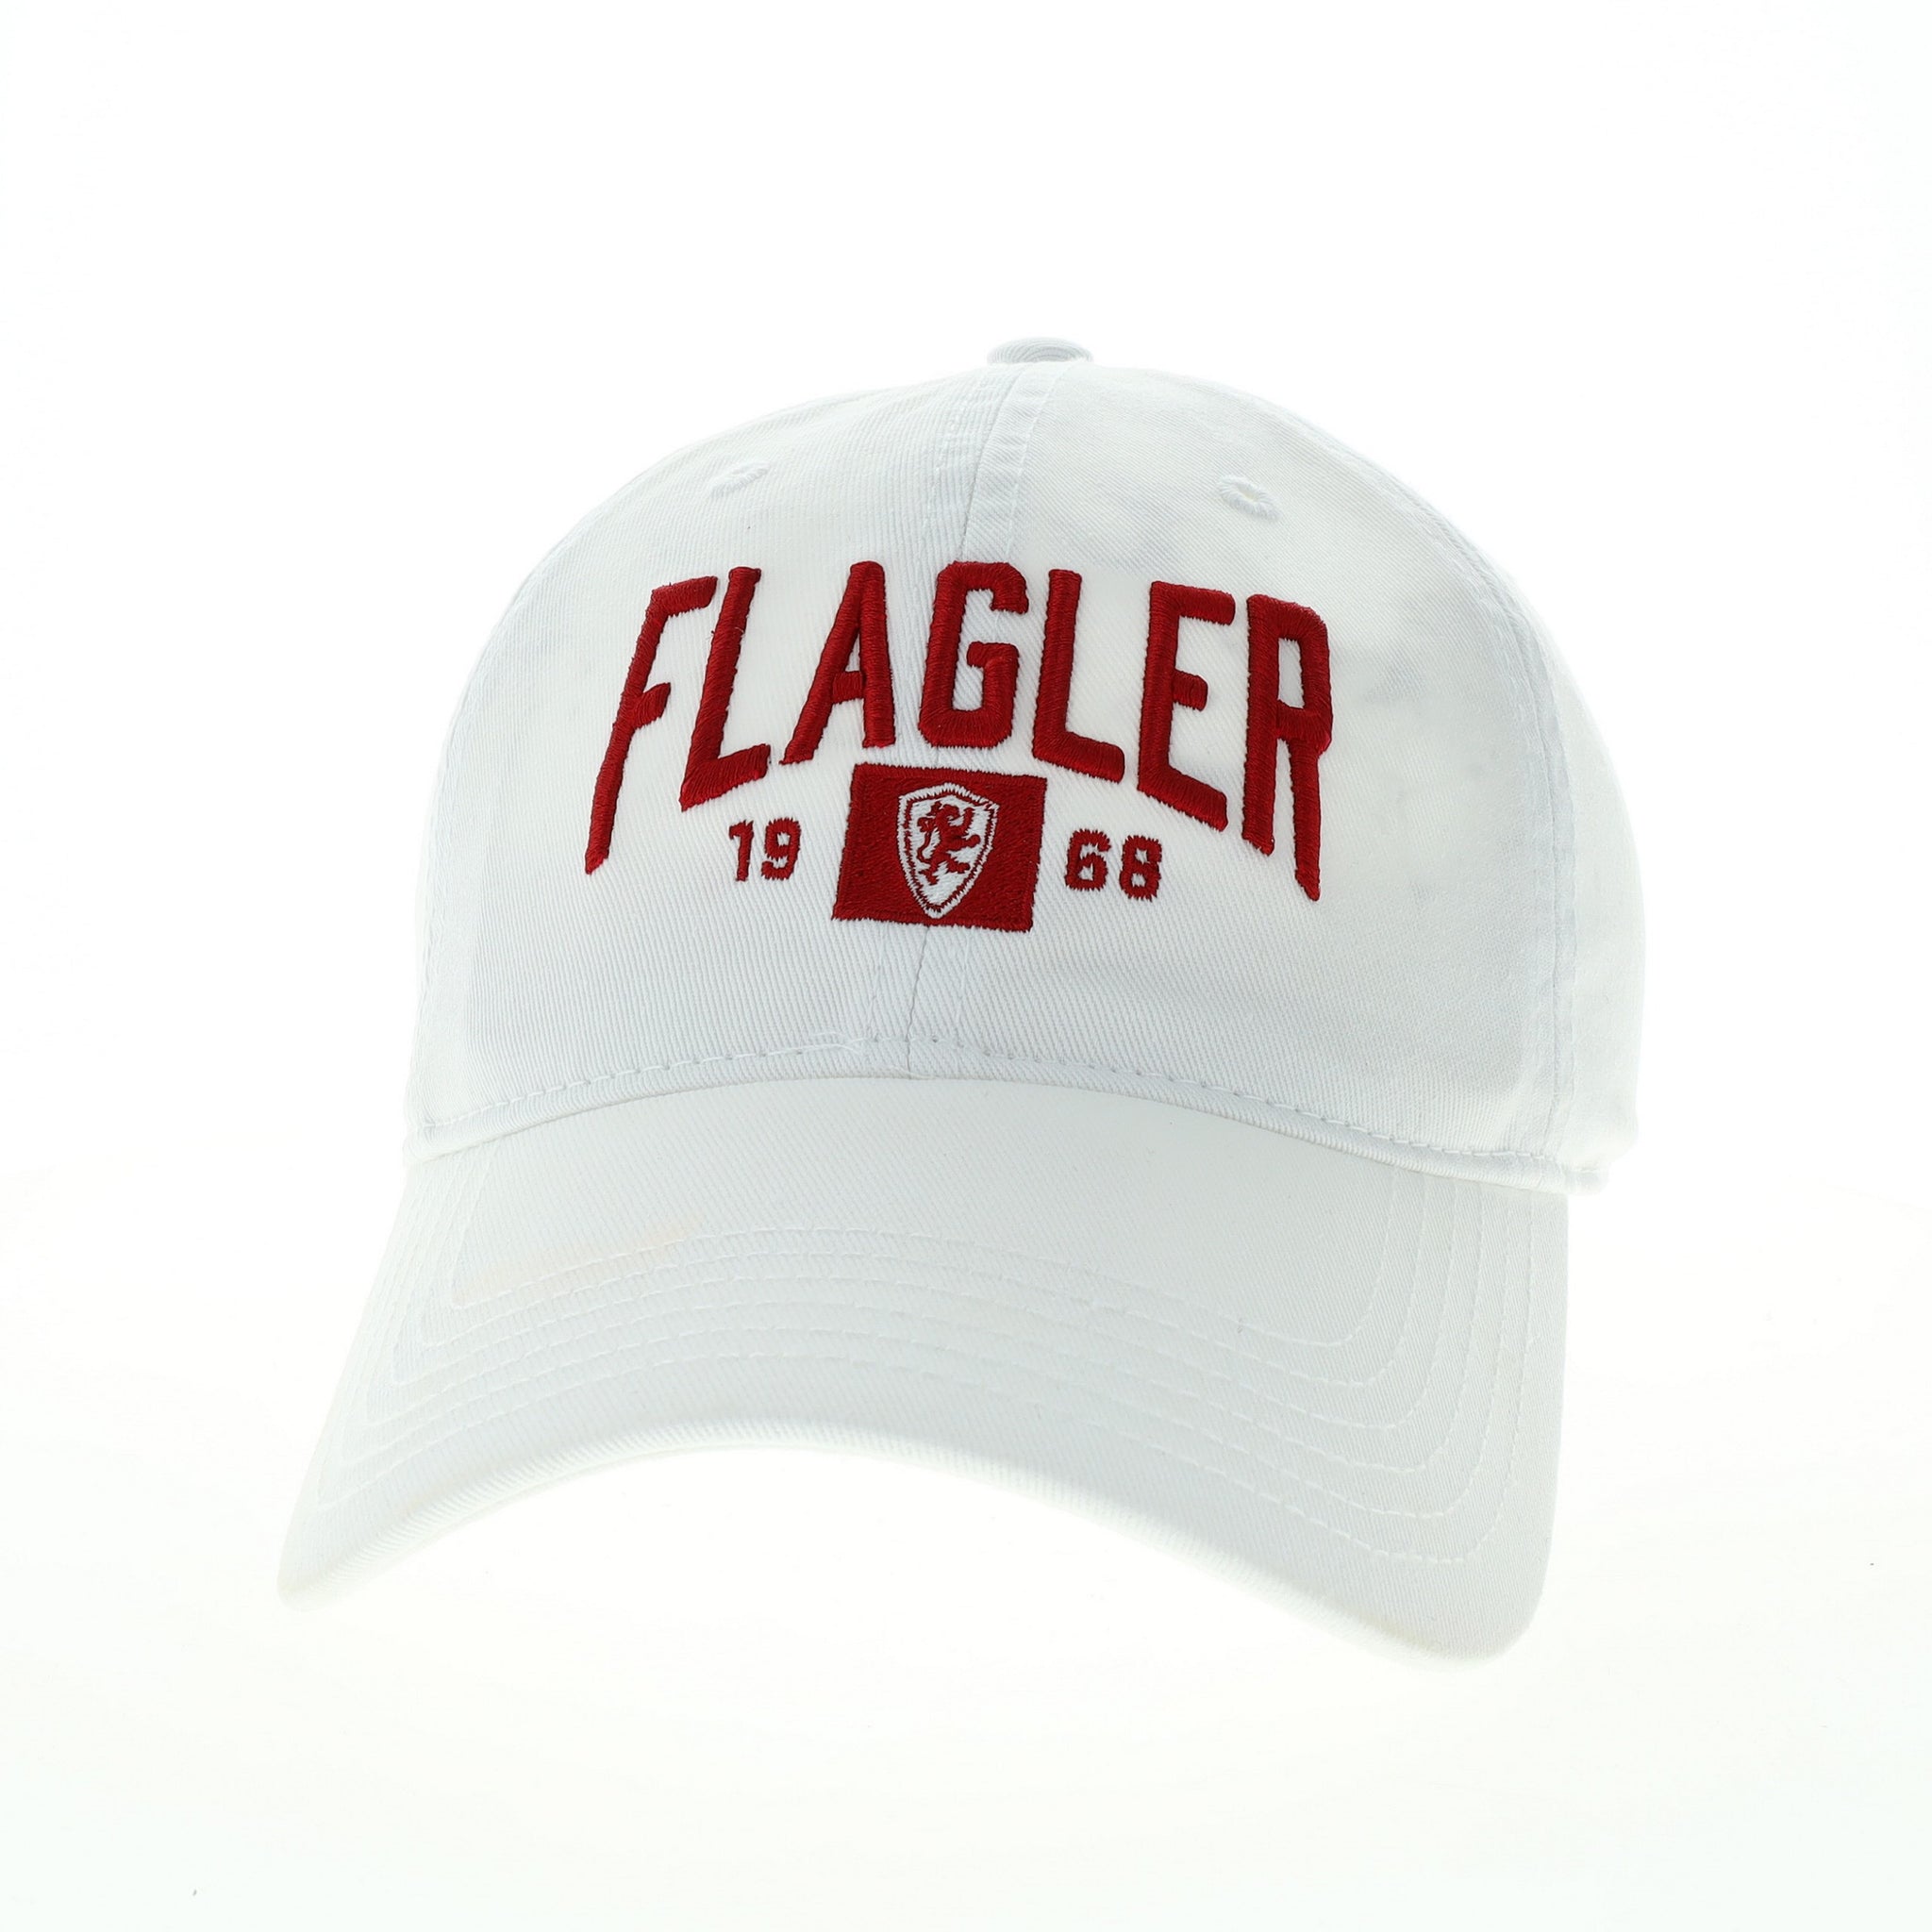 White hat with red embroider saying Flagler over 19 Flagler College Shield logo 68